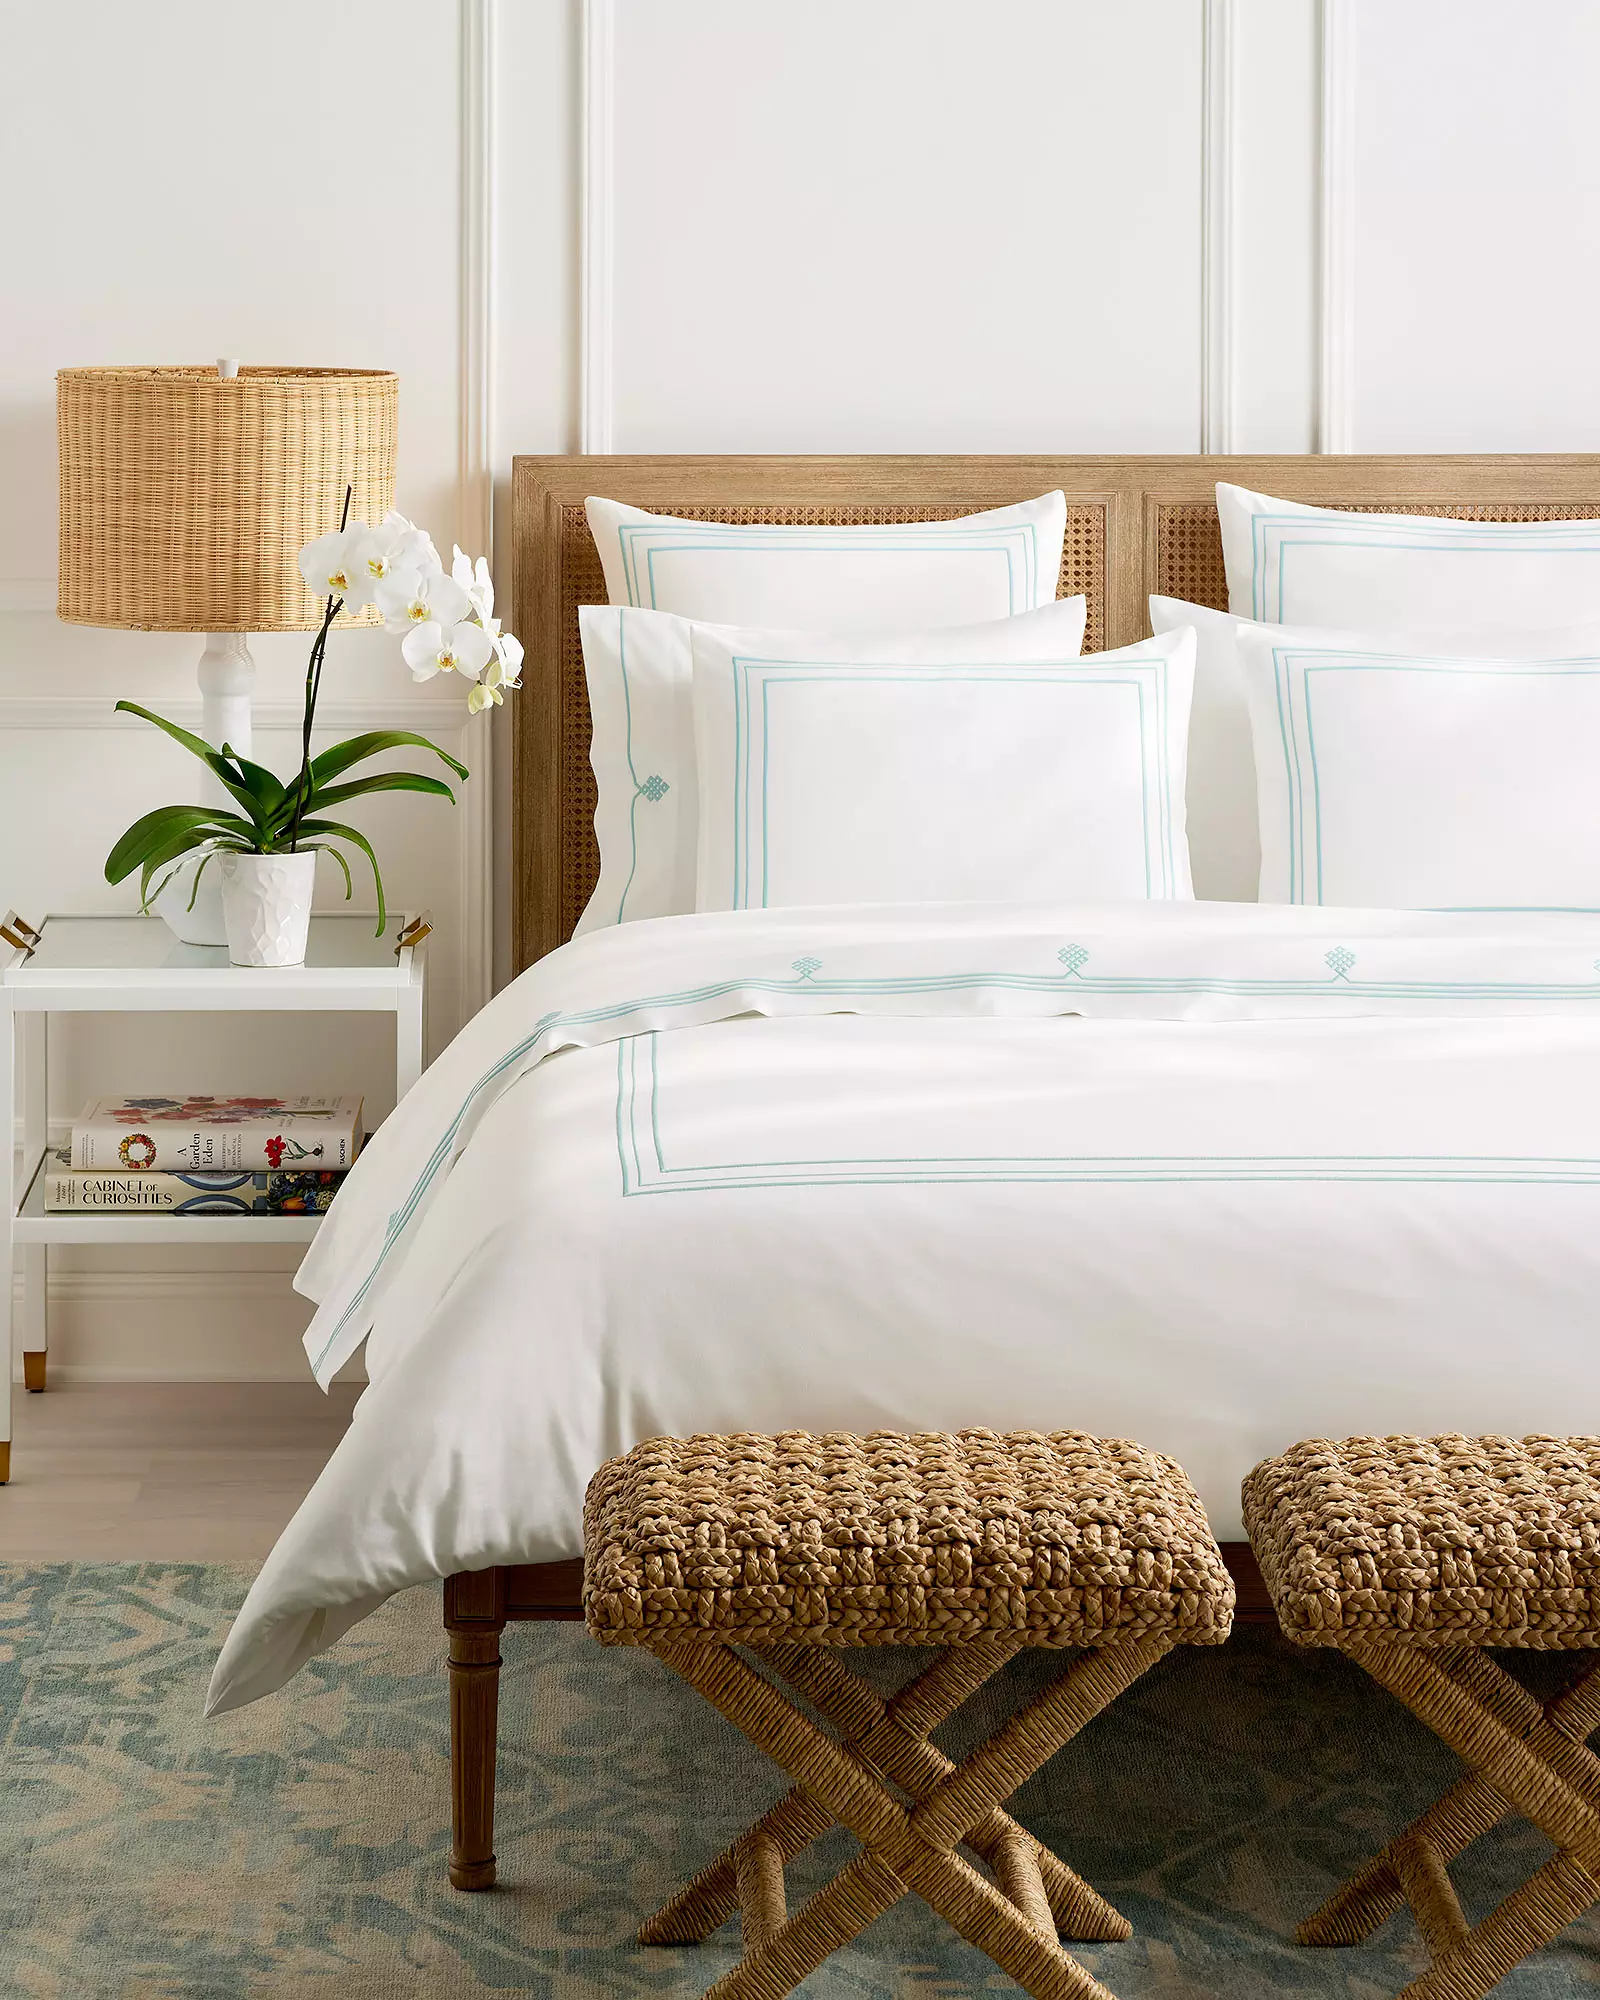 Big Sale on Beautiful Harbor Cane Bed - serena & lily 